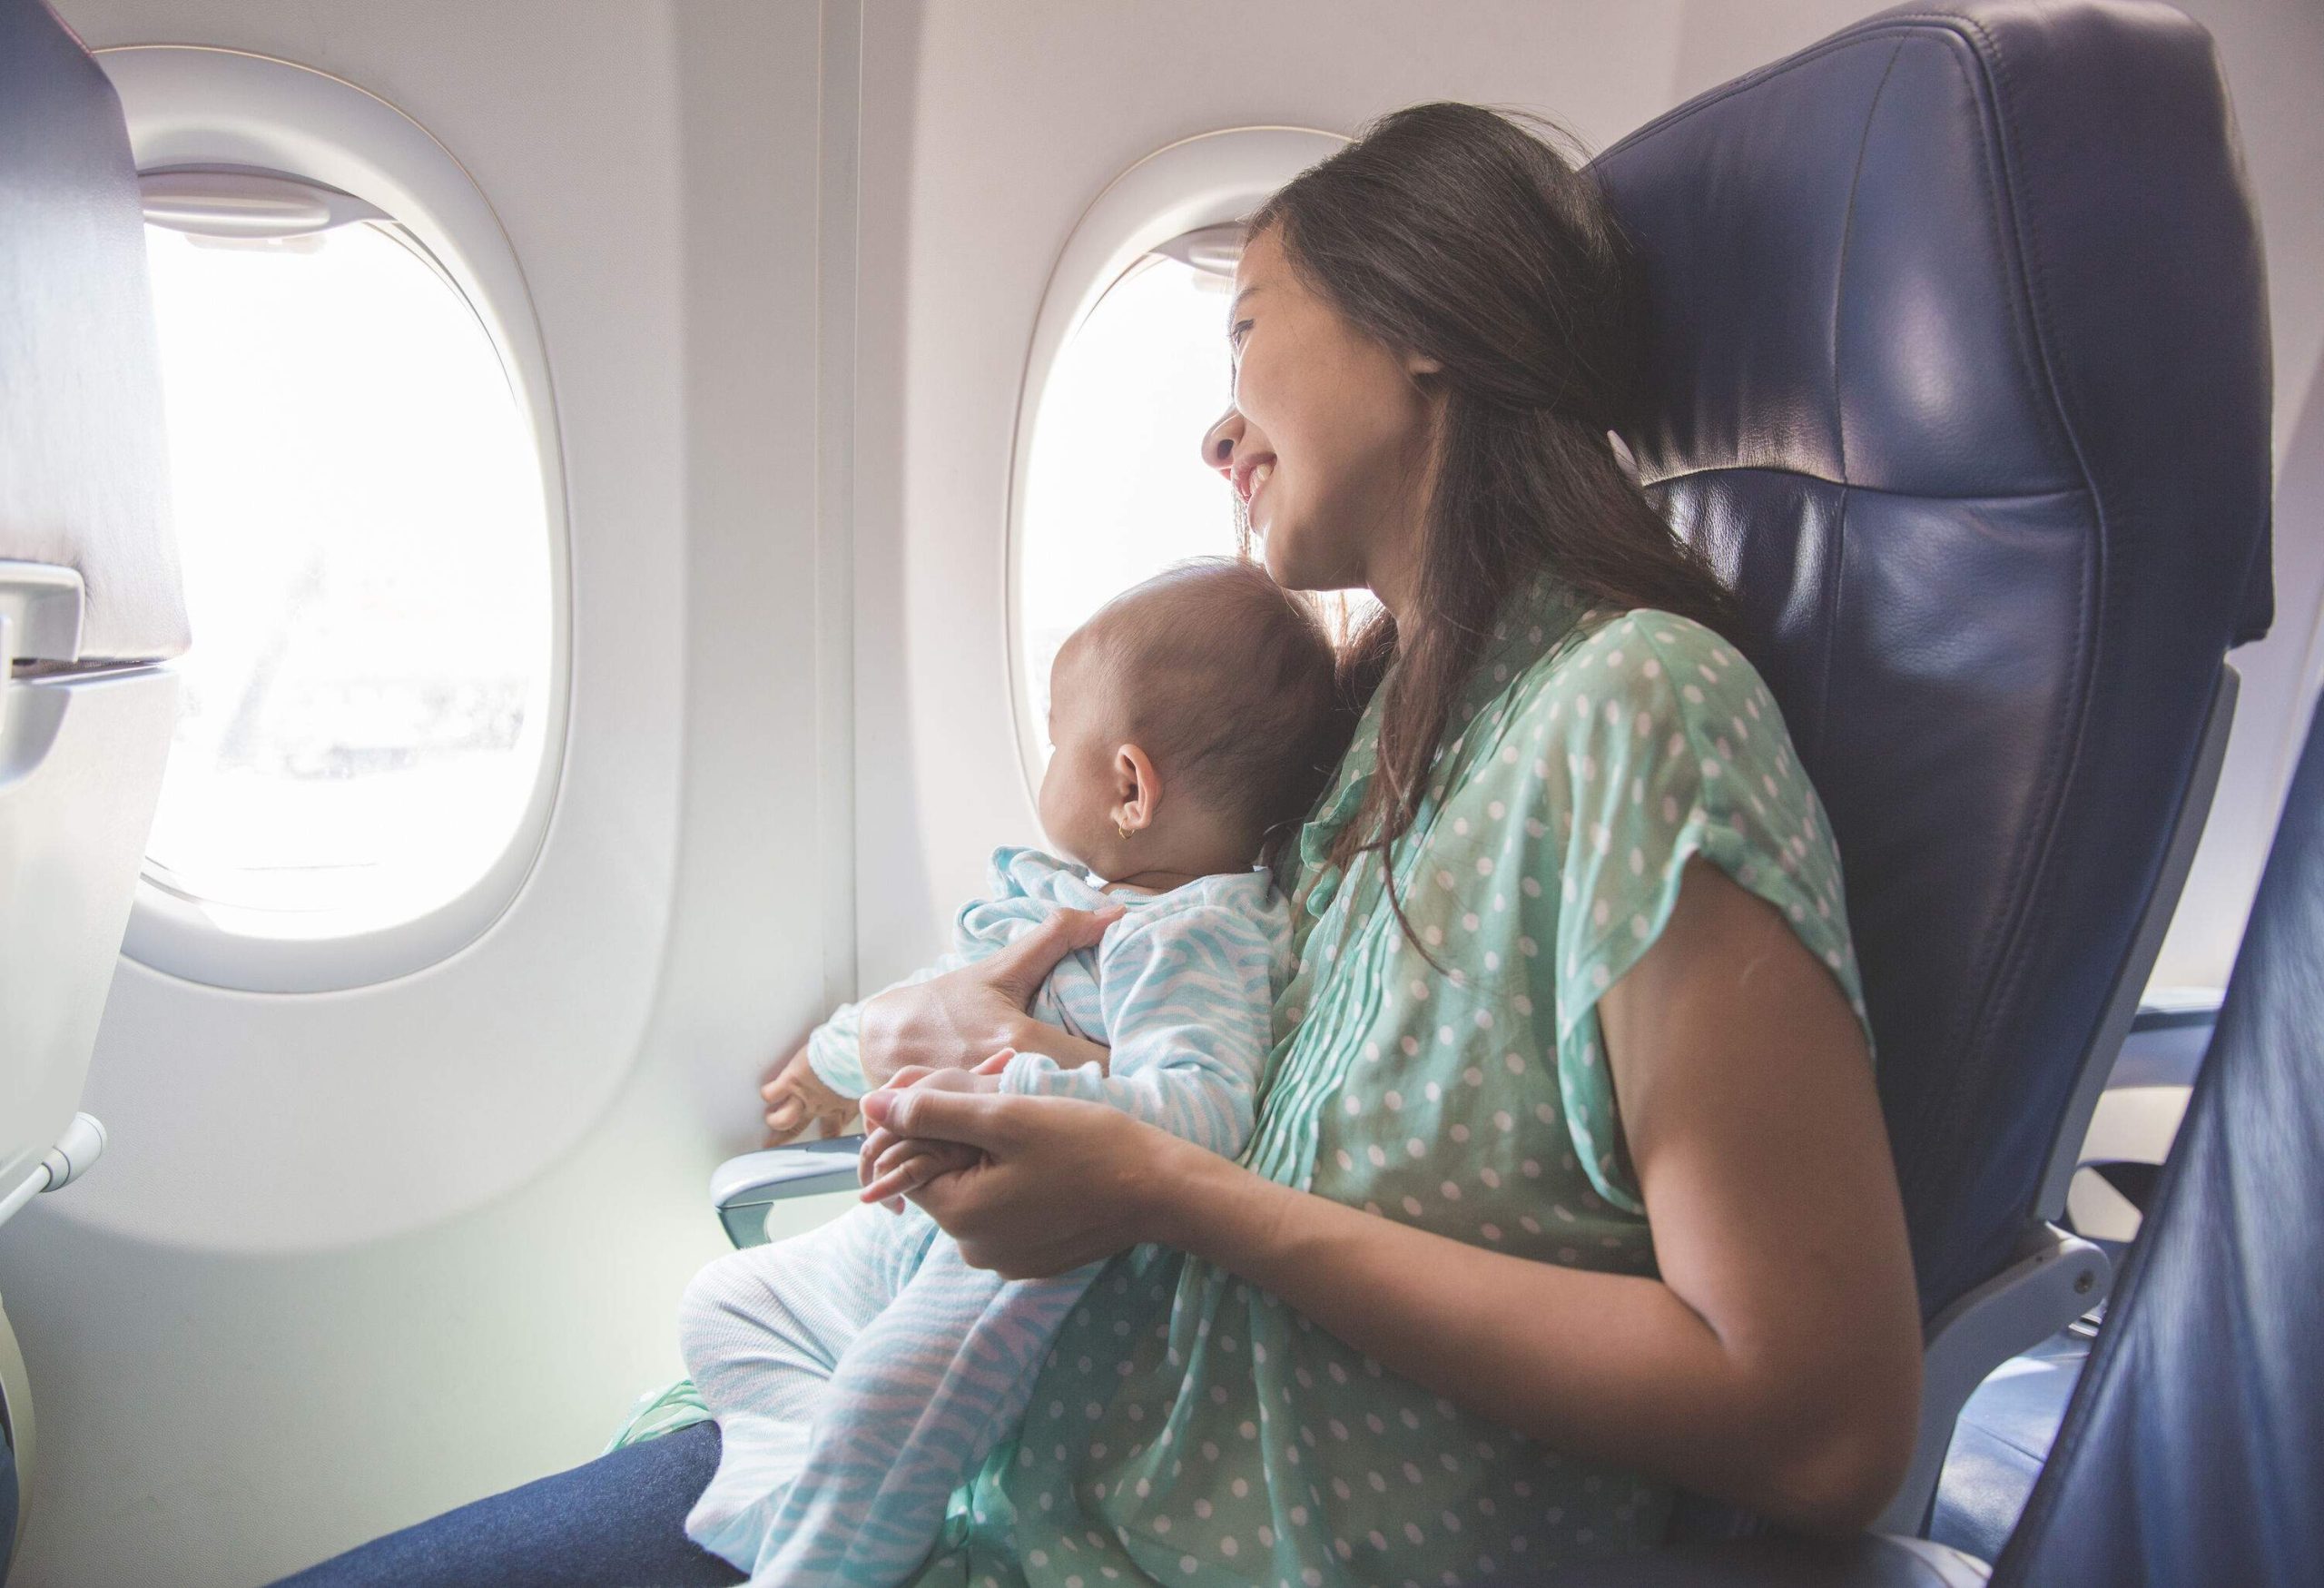 A mother and a baby on the plane seated next to the window.